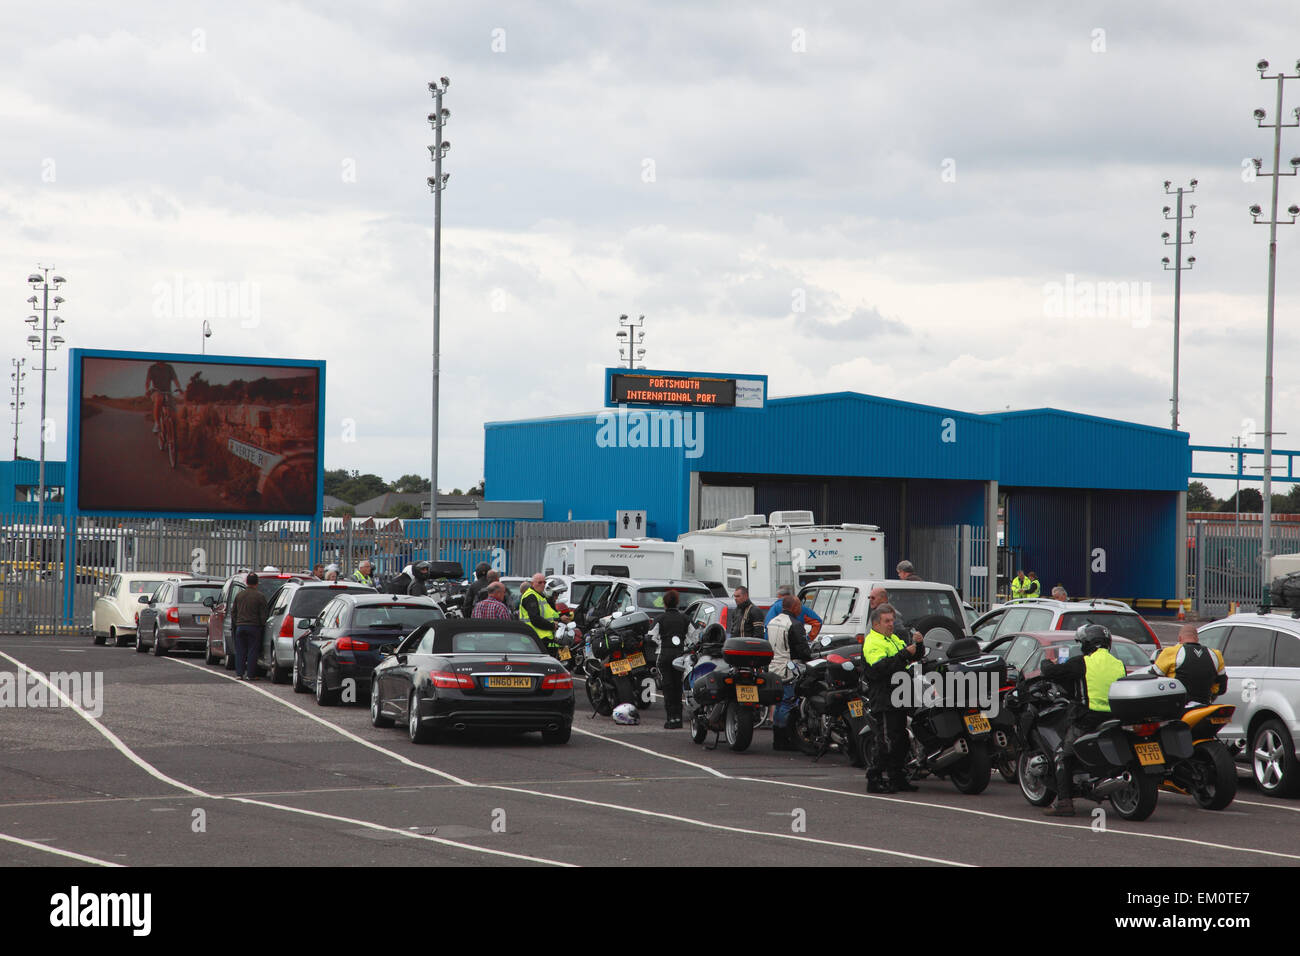 Cars, motorbikes and passengers waiting to board the Brittany ferry Pont Aven at the port terminal in Portsmouth, England Stock Photo